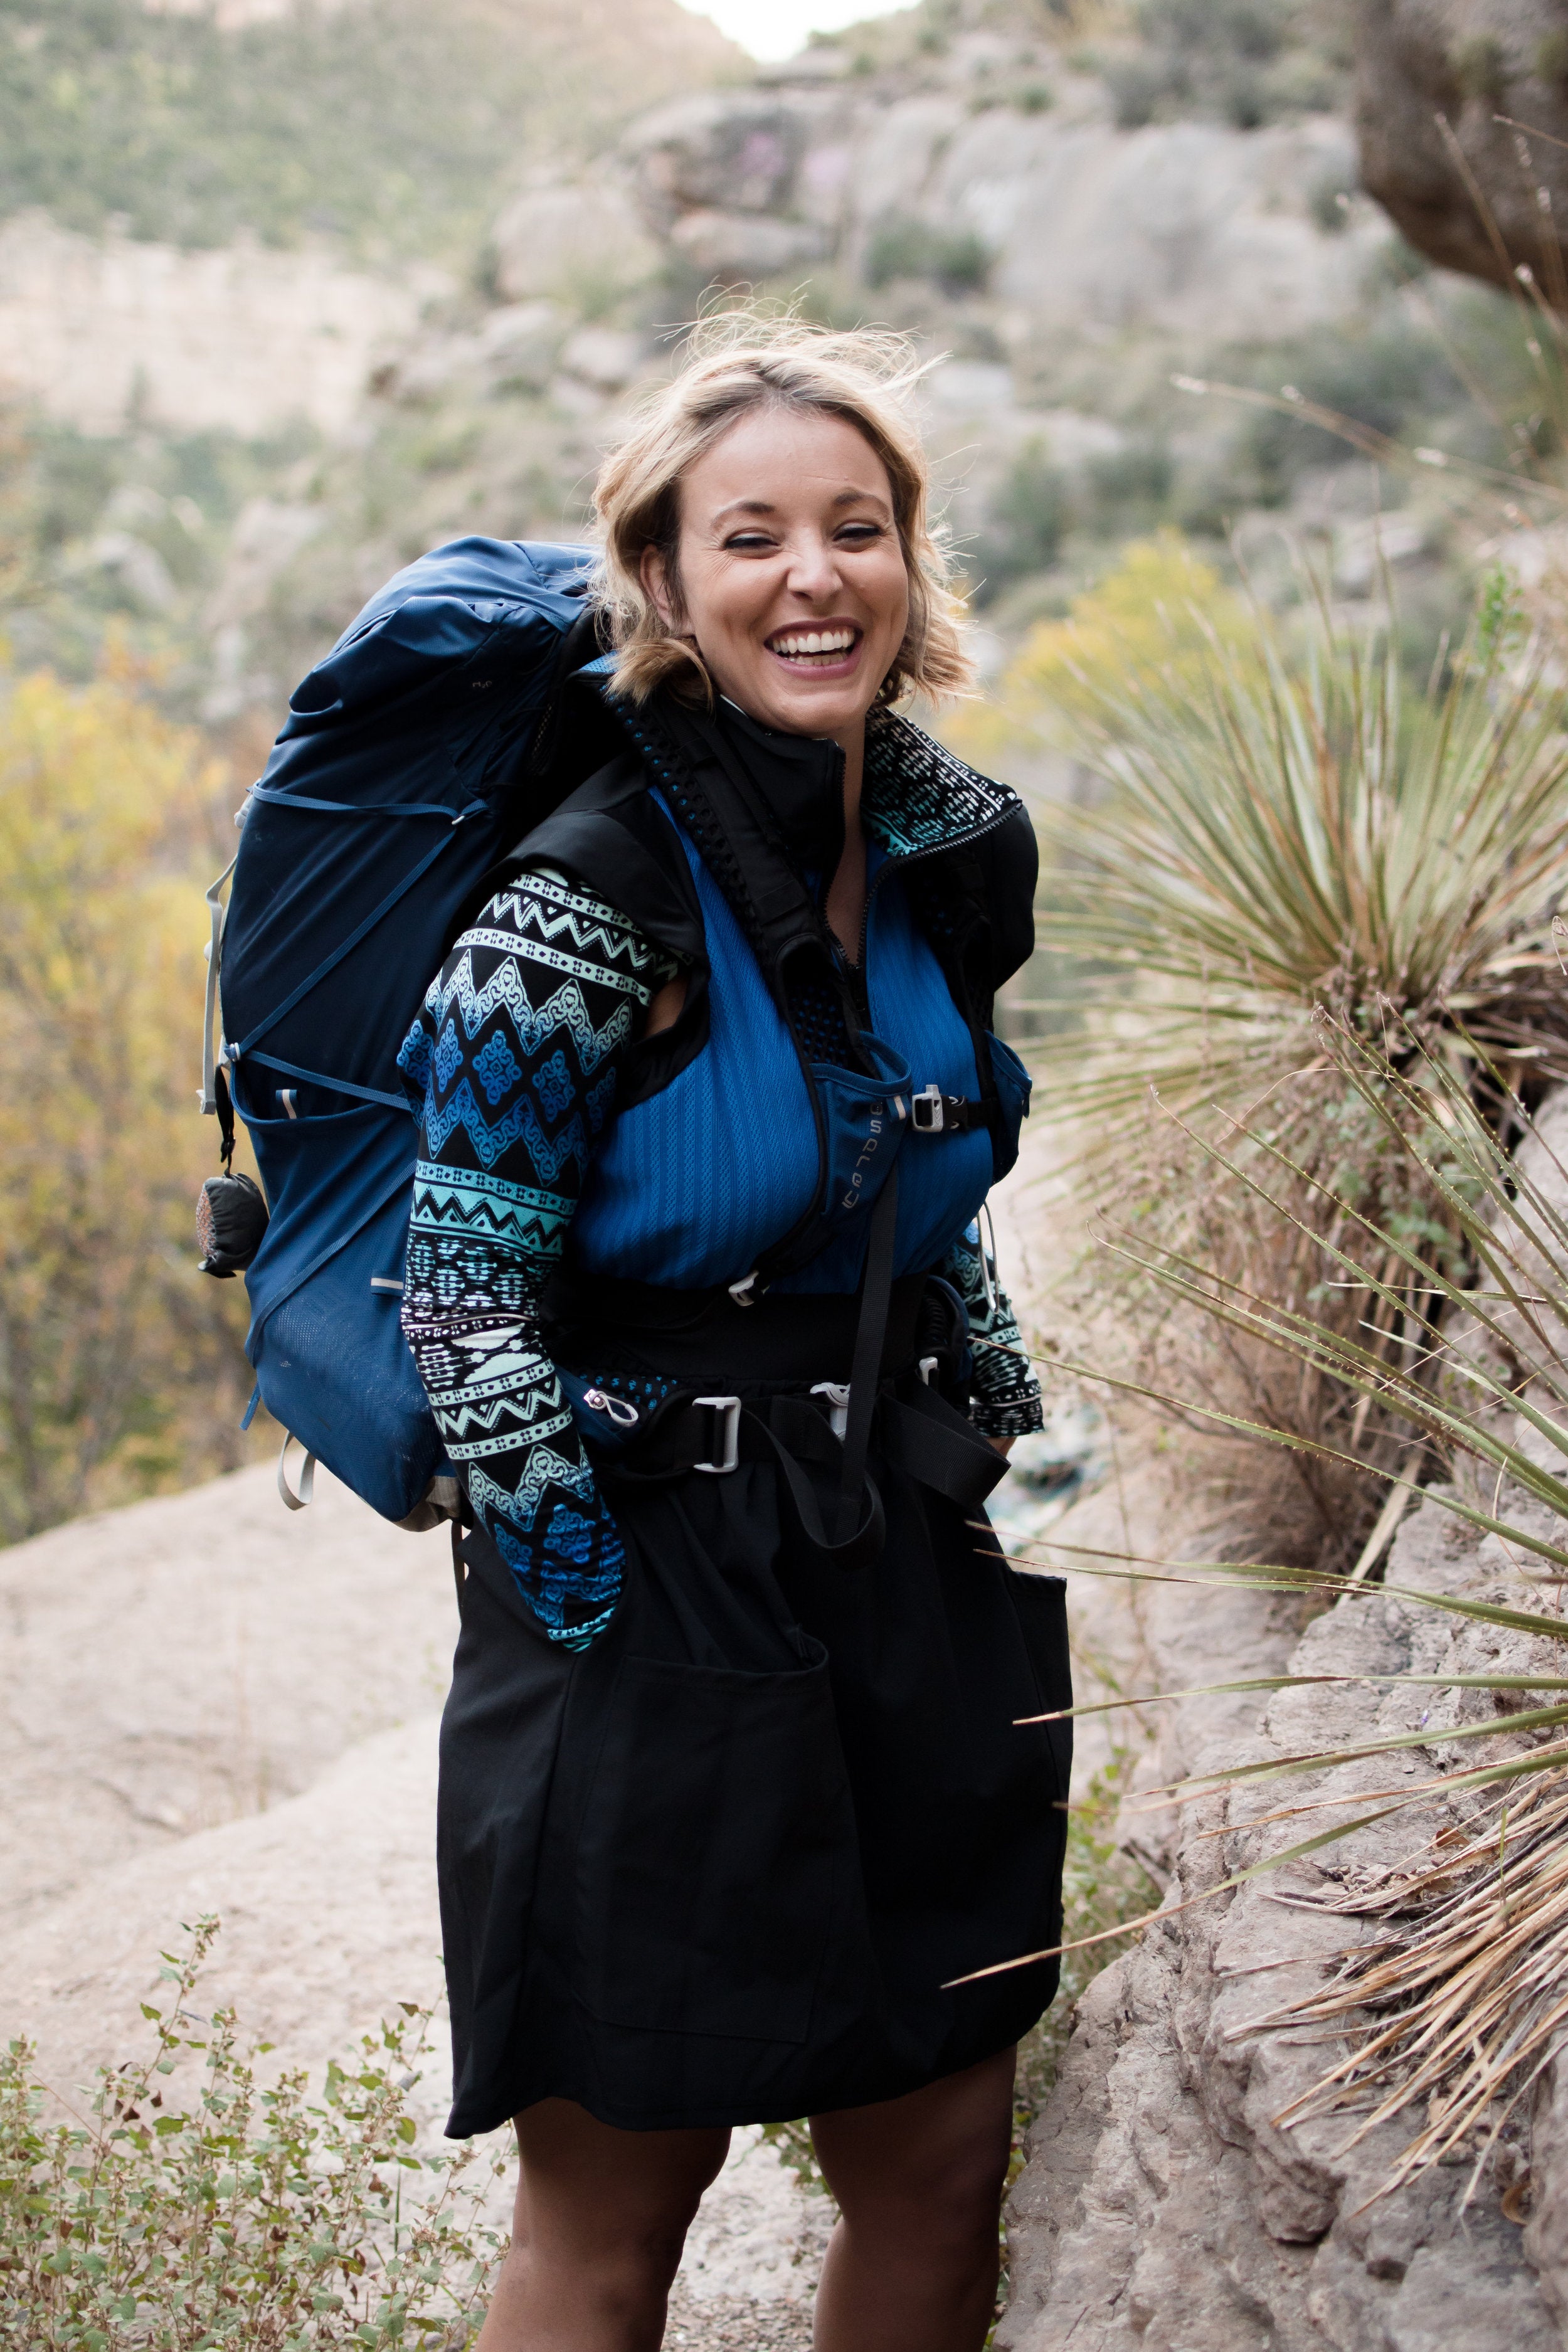 Hiking essentials – How to dress when hiking